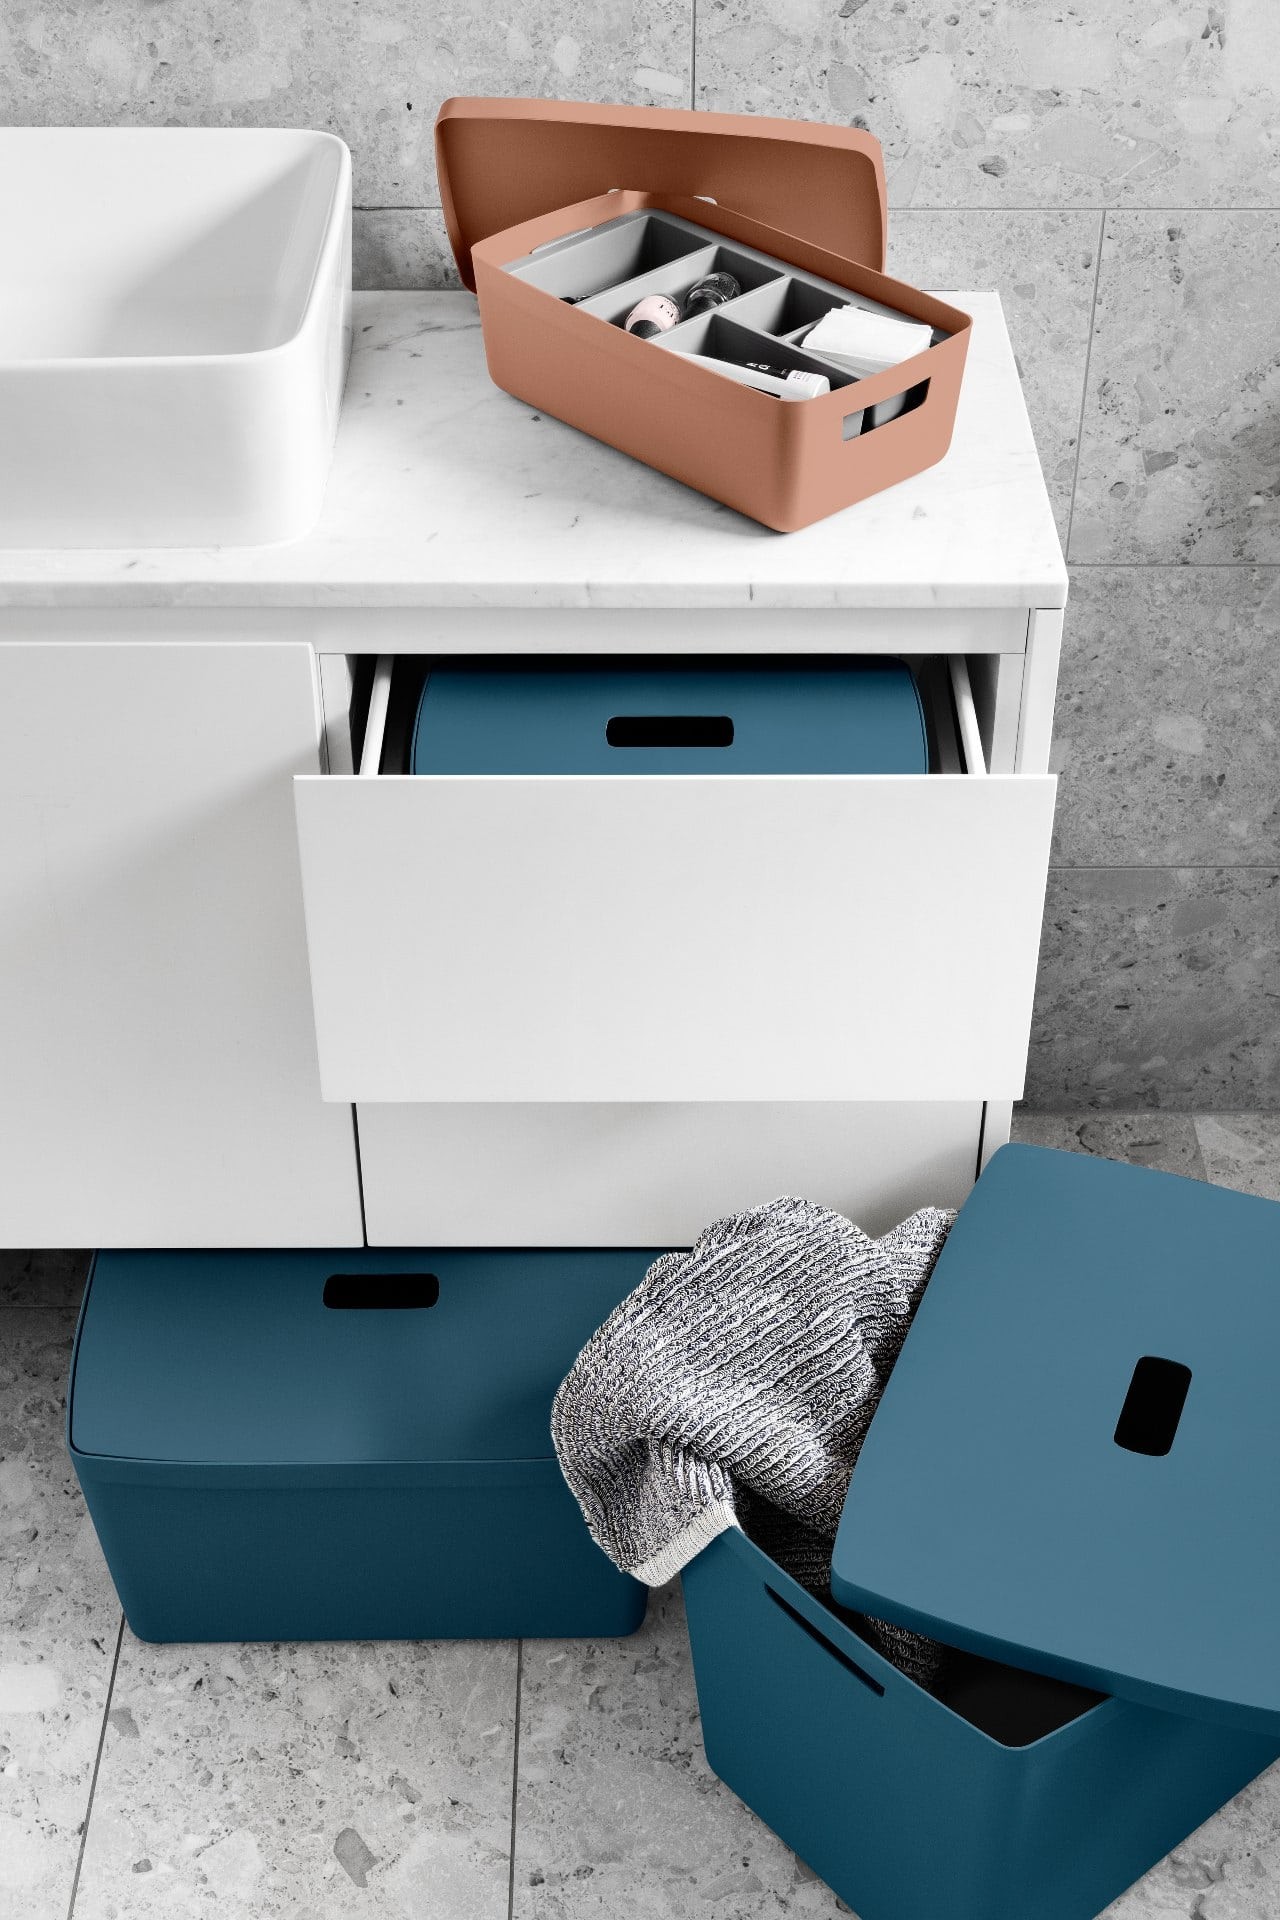 desert clay and cactus blue inabox storage containers in bathroom